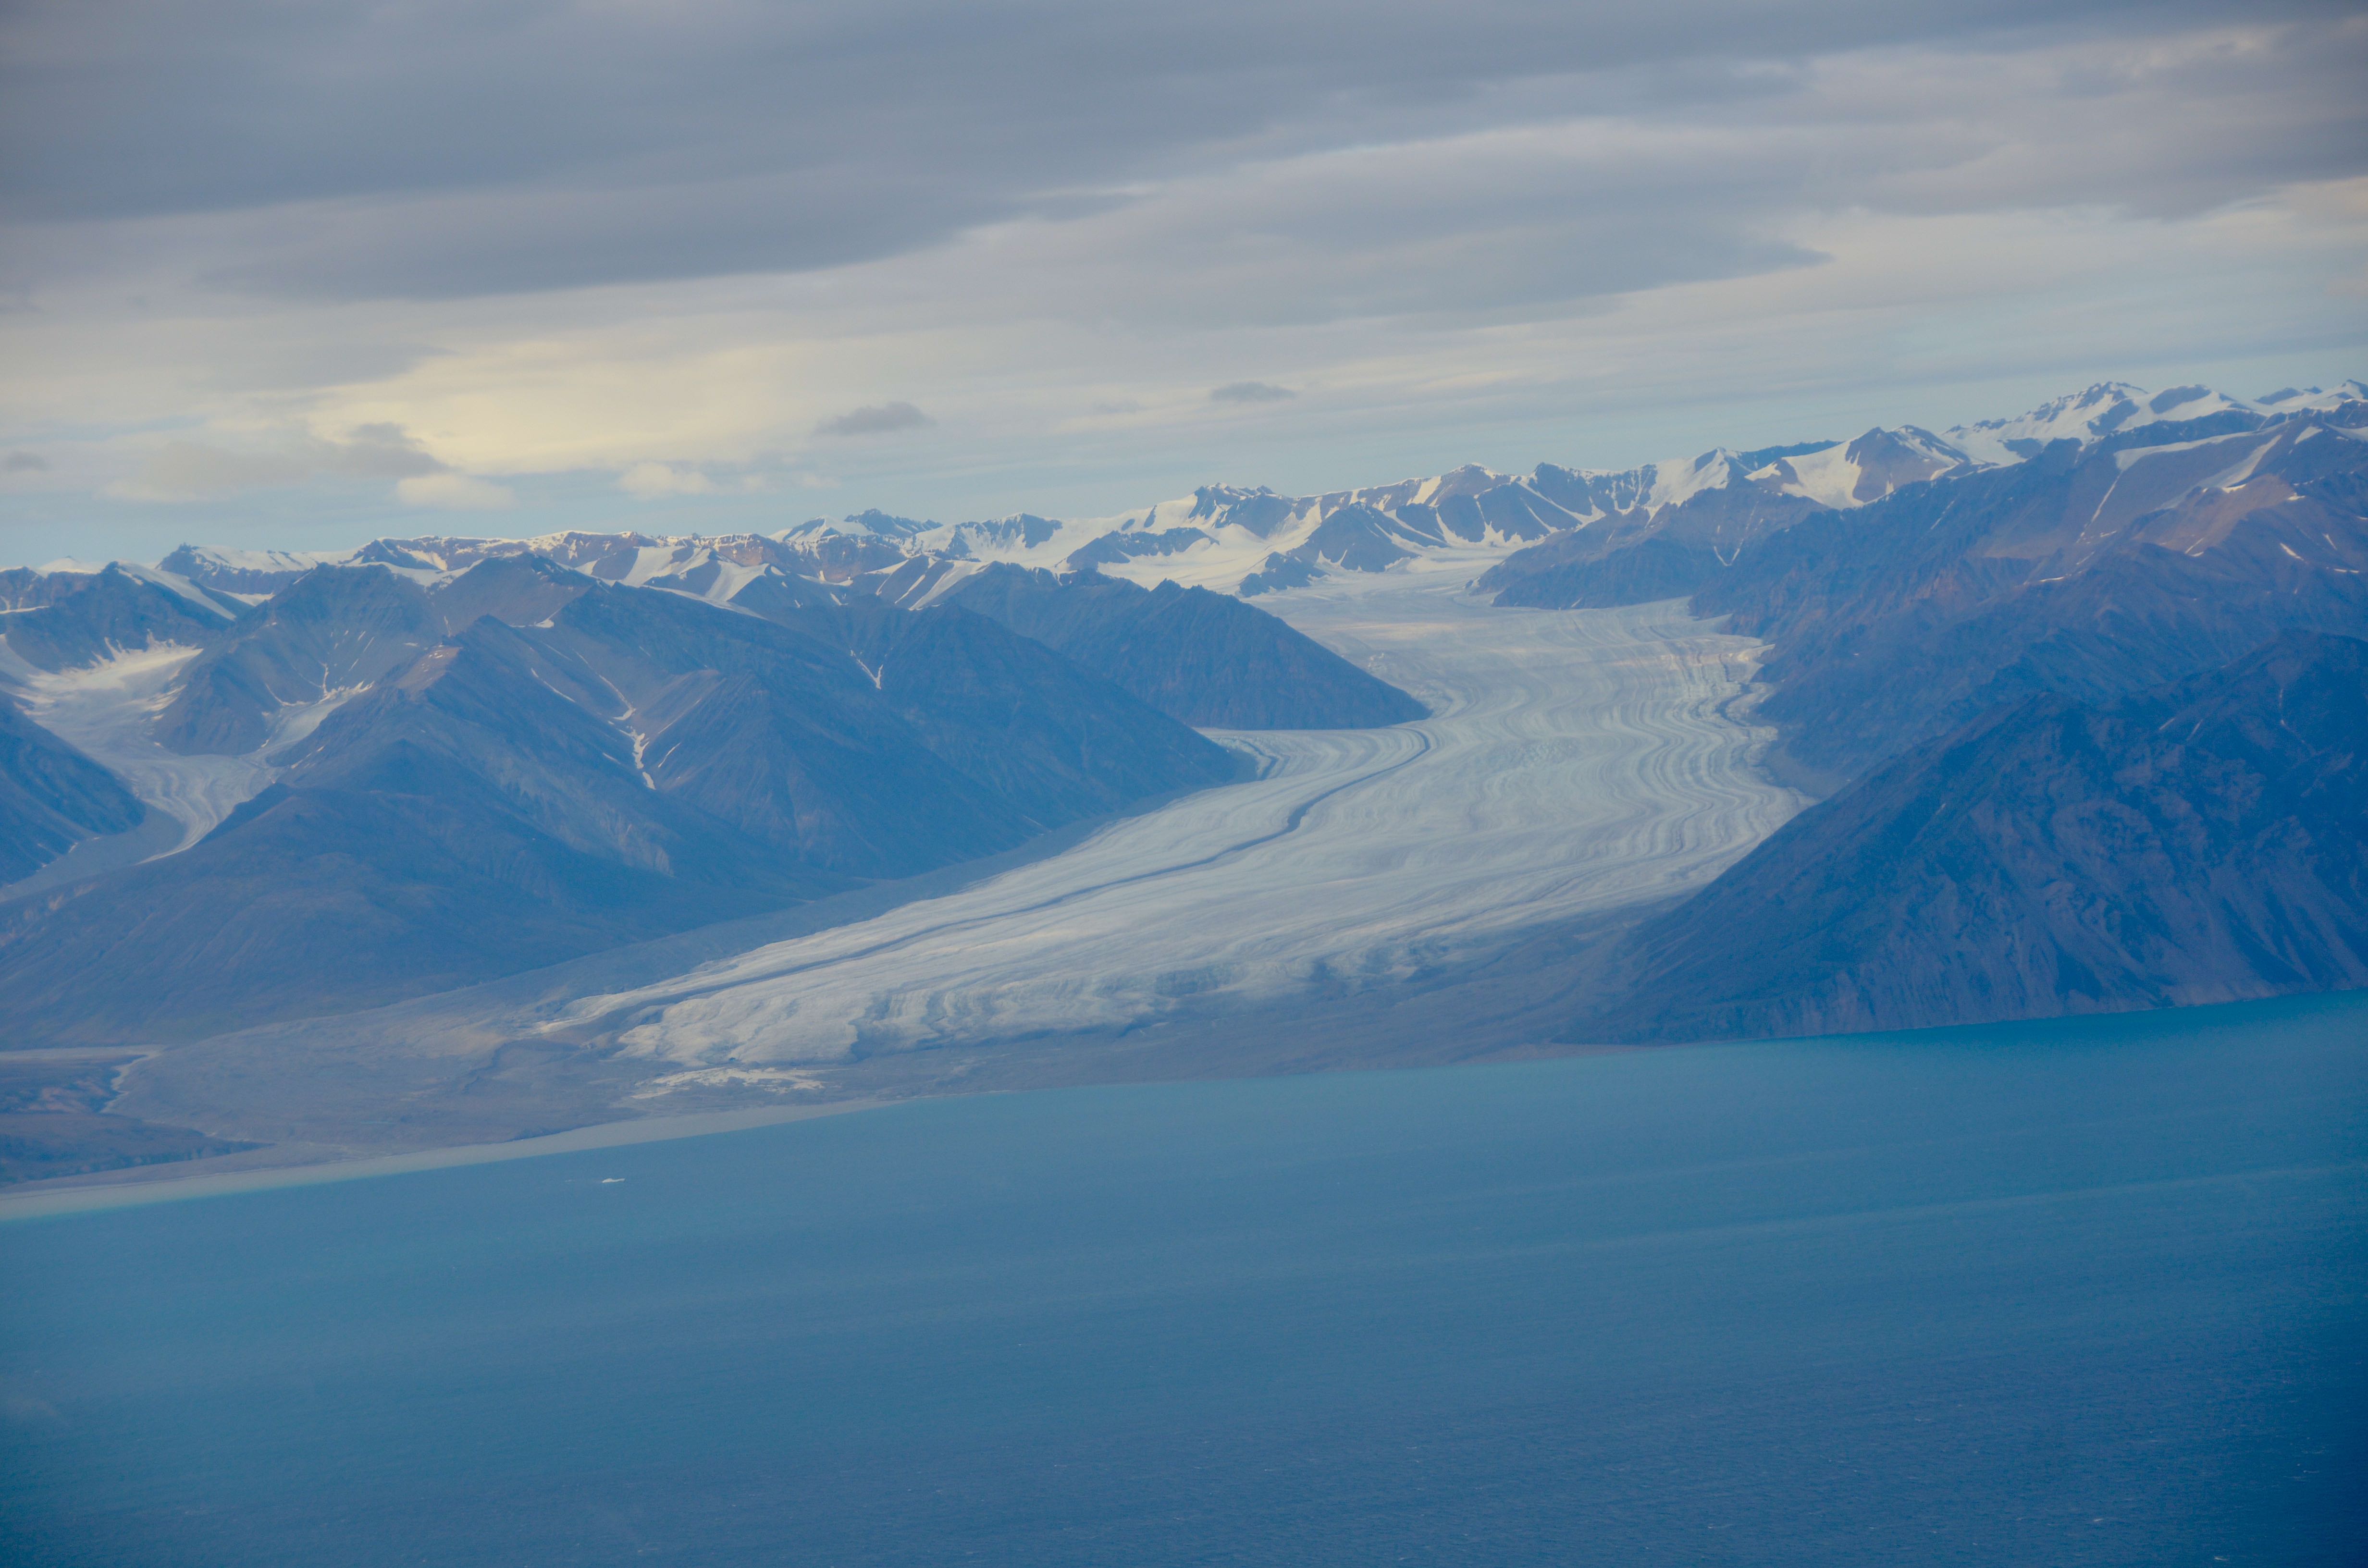 A glacier seen from the sky near Pond Inlet, taken by the Month on Mars expedition en route to Arctic Bay.